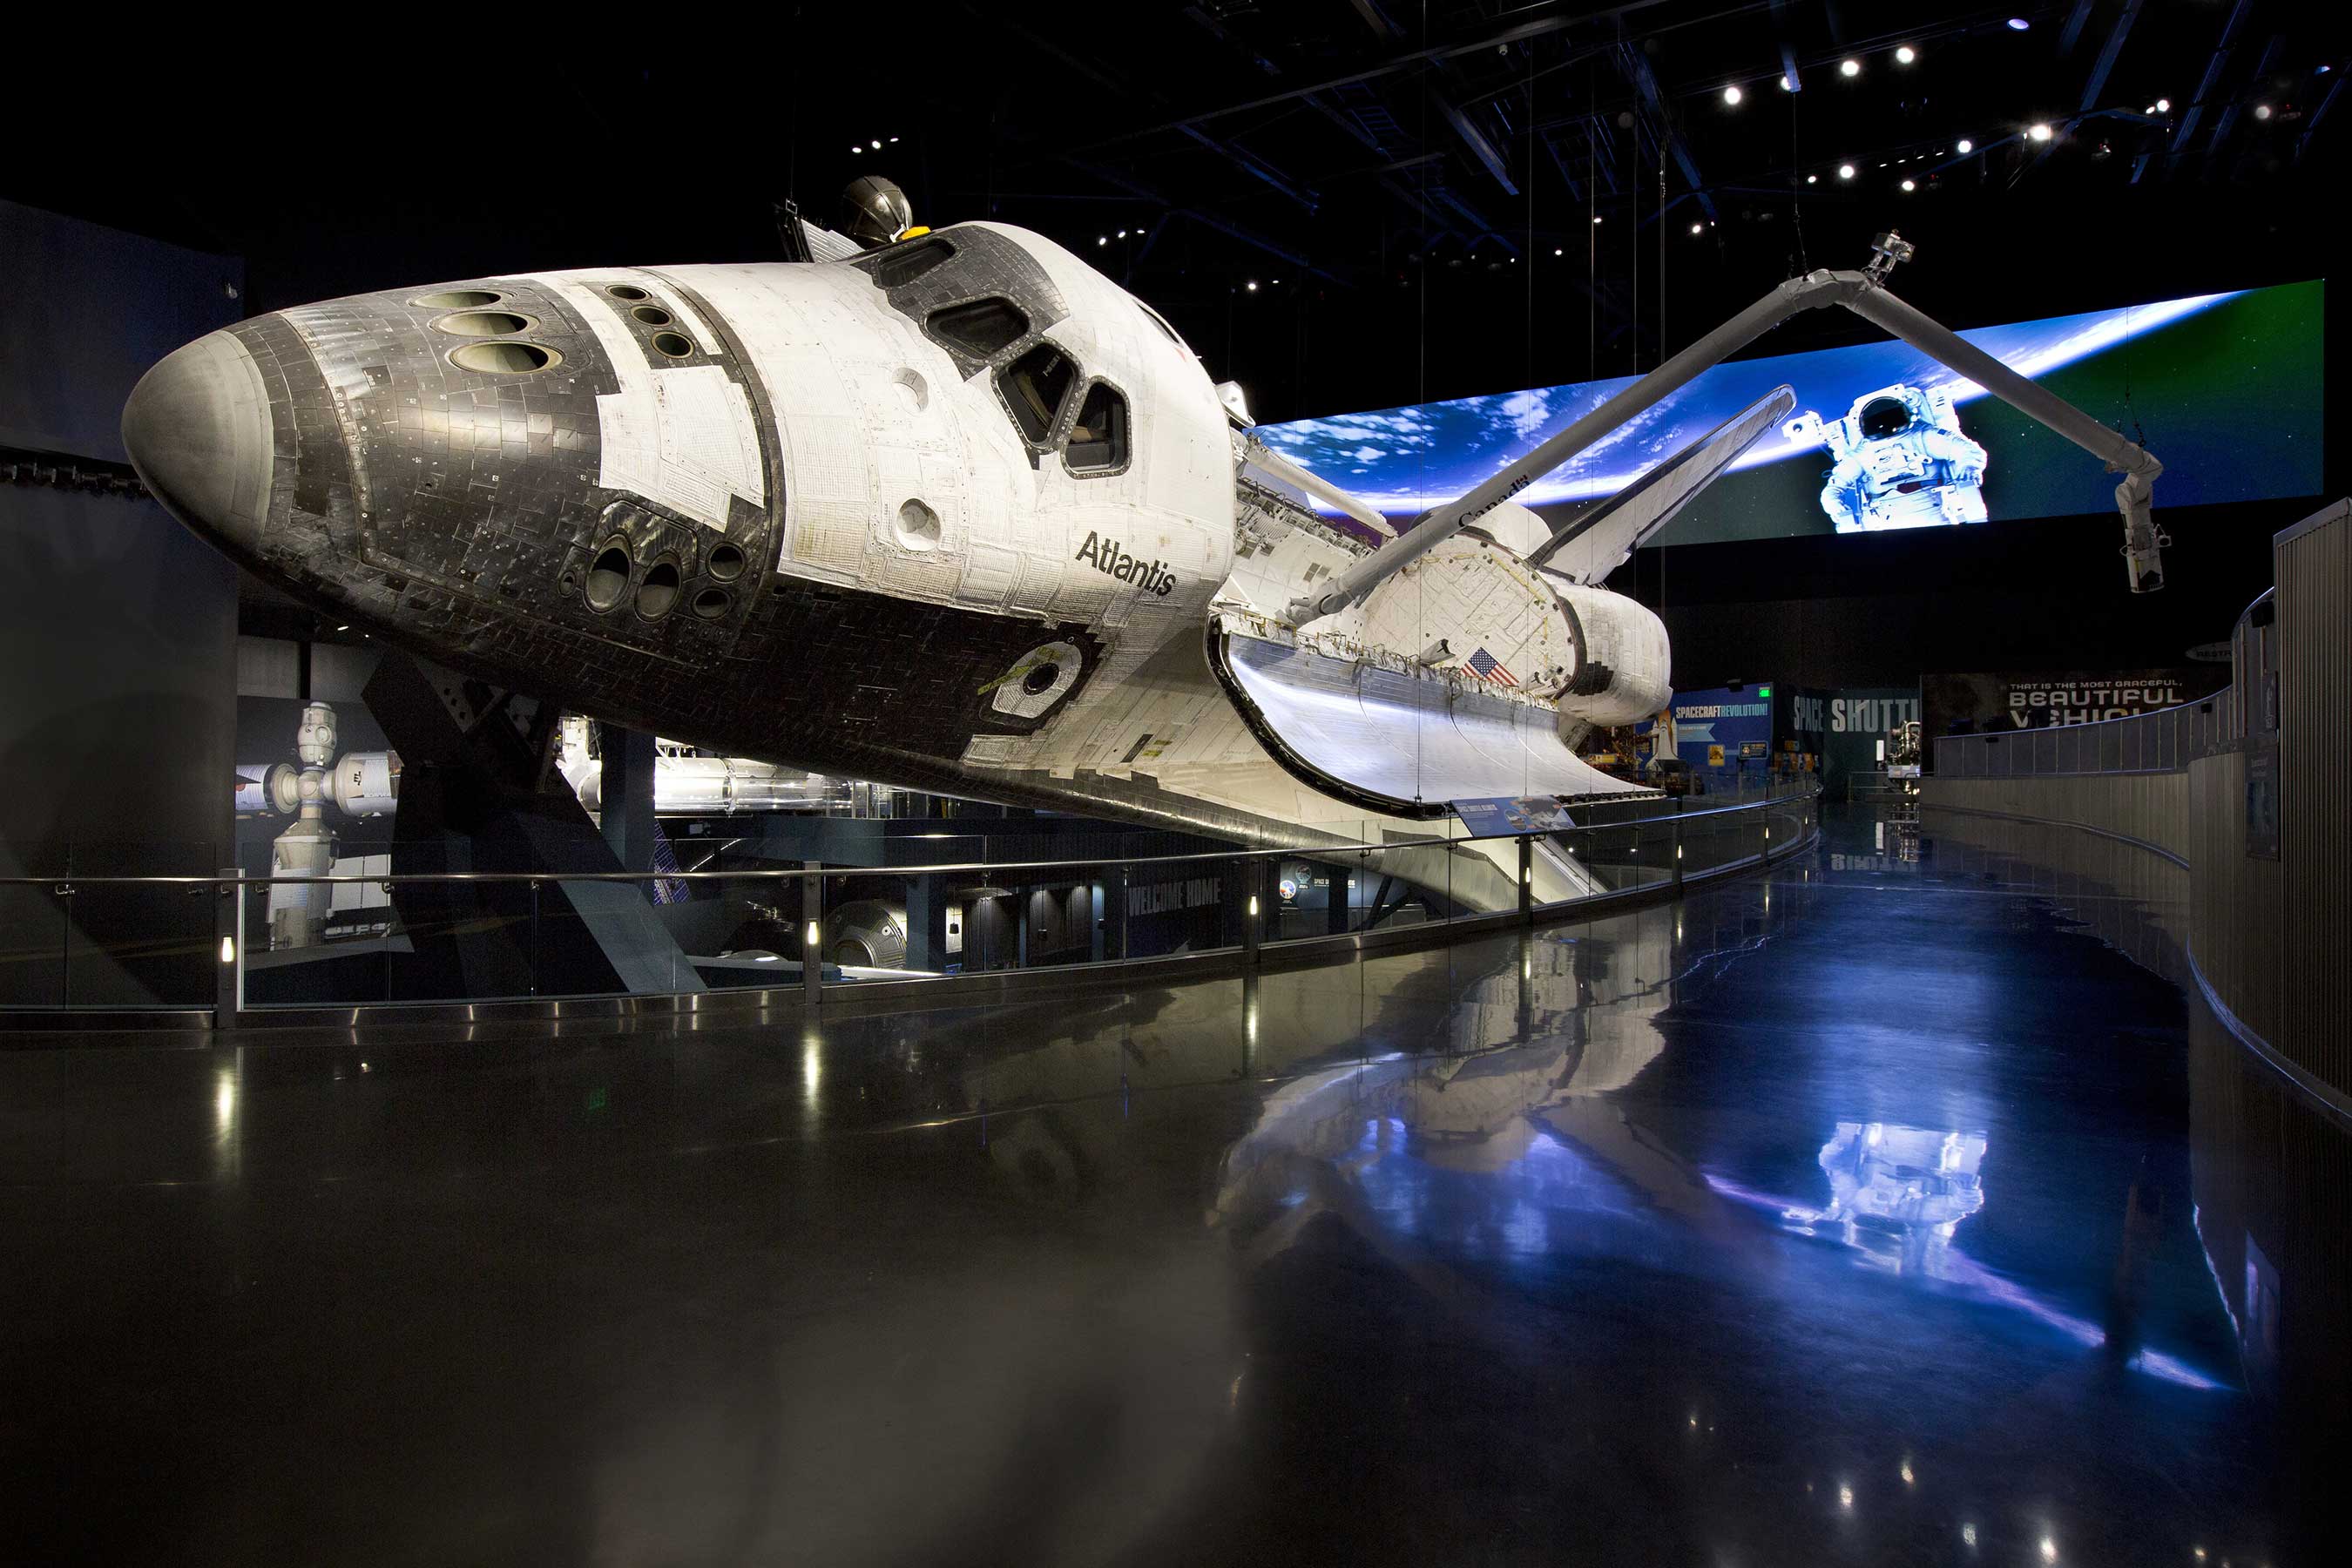 The Space Shuttle Atlantis attraction at Kennedy Space Center Visitor Complex allows guests to “be the astronaut” and come nose-to-nose with the historic spacecraft.